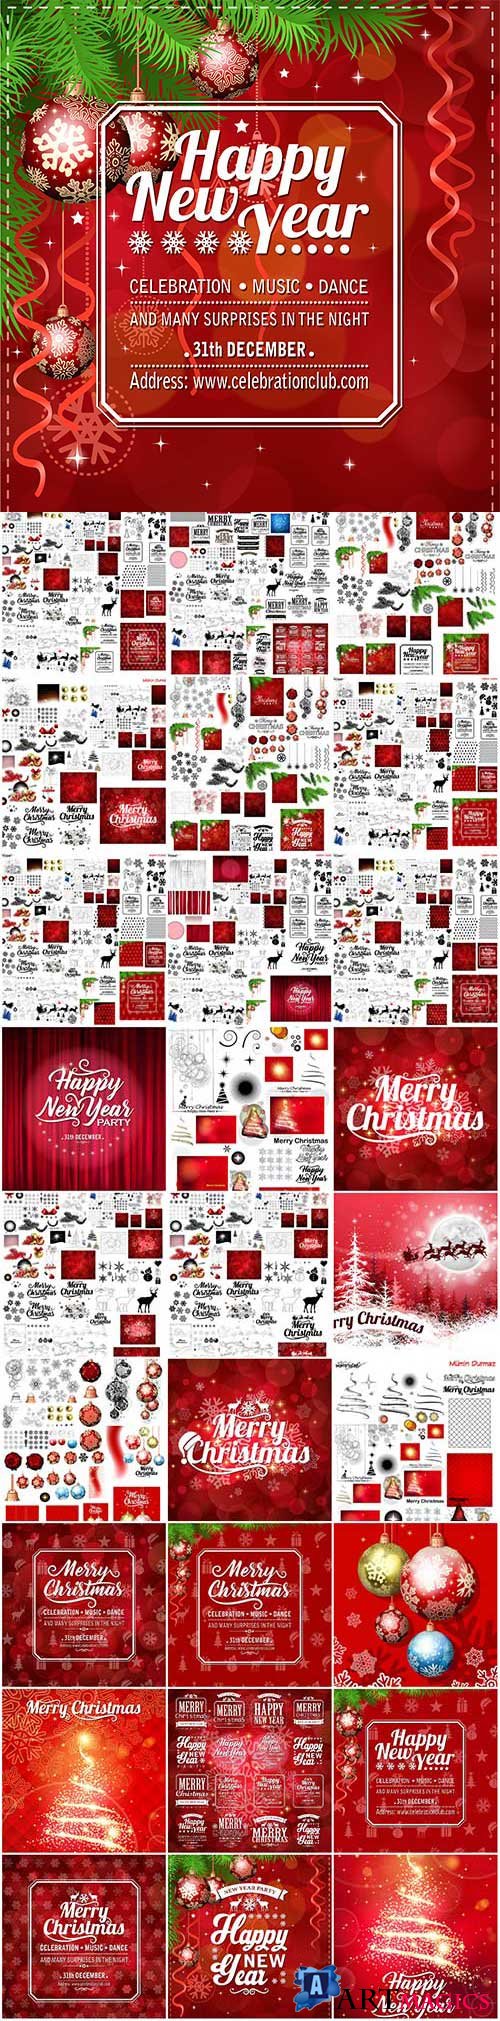 New Year and Christmas vector vol 11